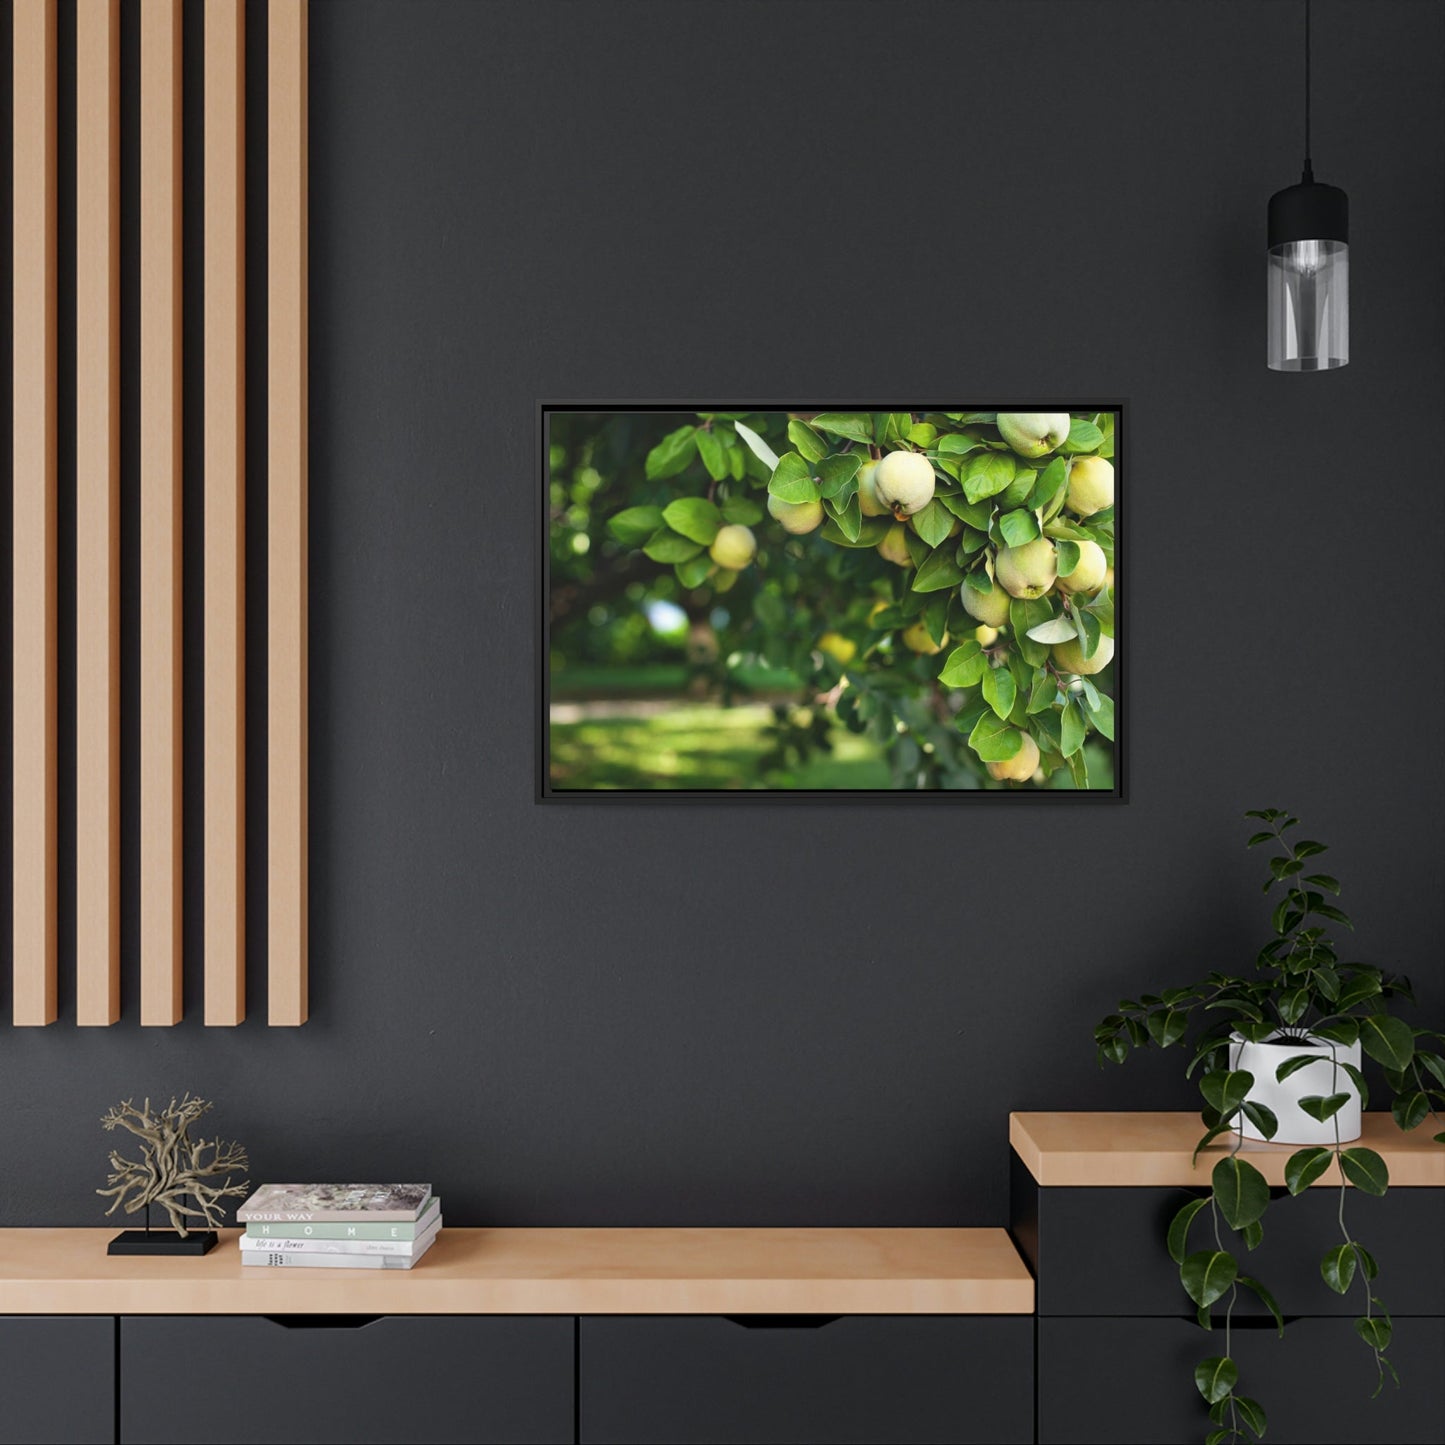 Harvest Time: Fruit Trees Painting on Canvas